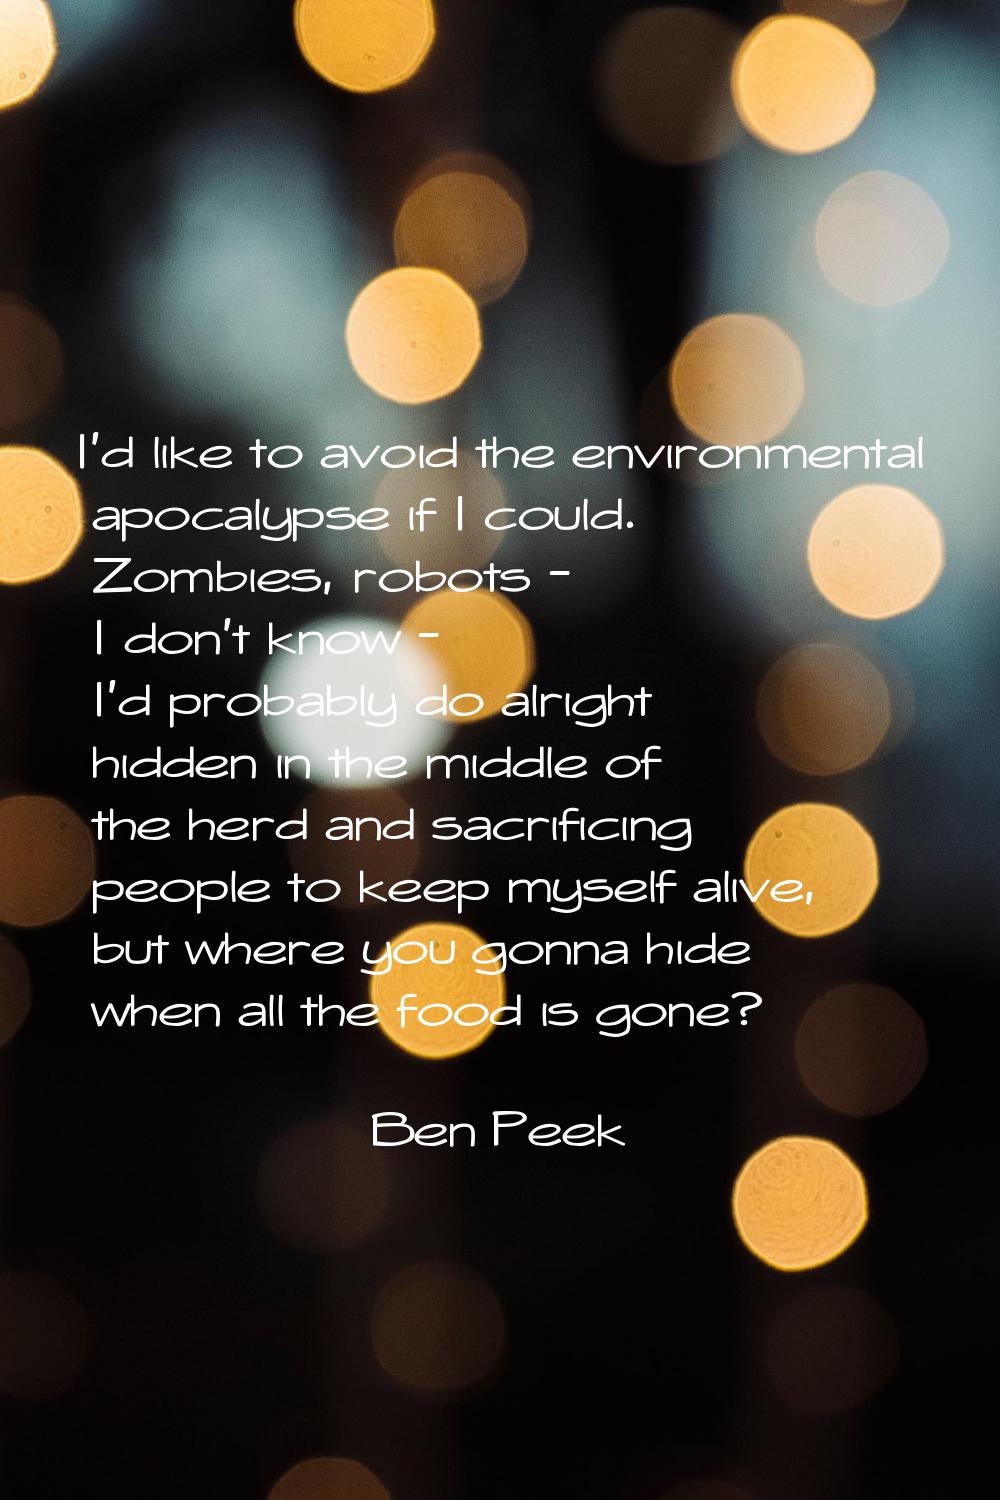 I'd like to avoid the environmental apocalypse if I could. Zombies, robots - I don't know - I'd pro